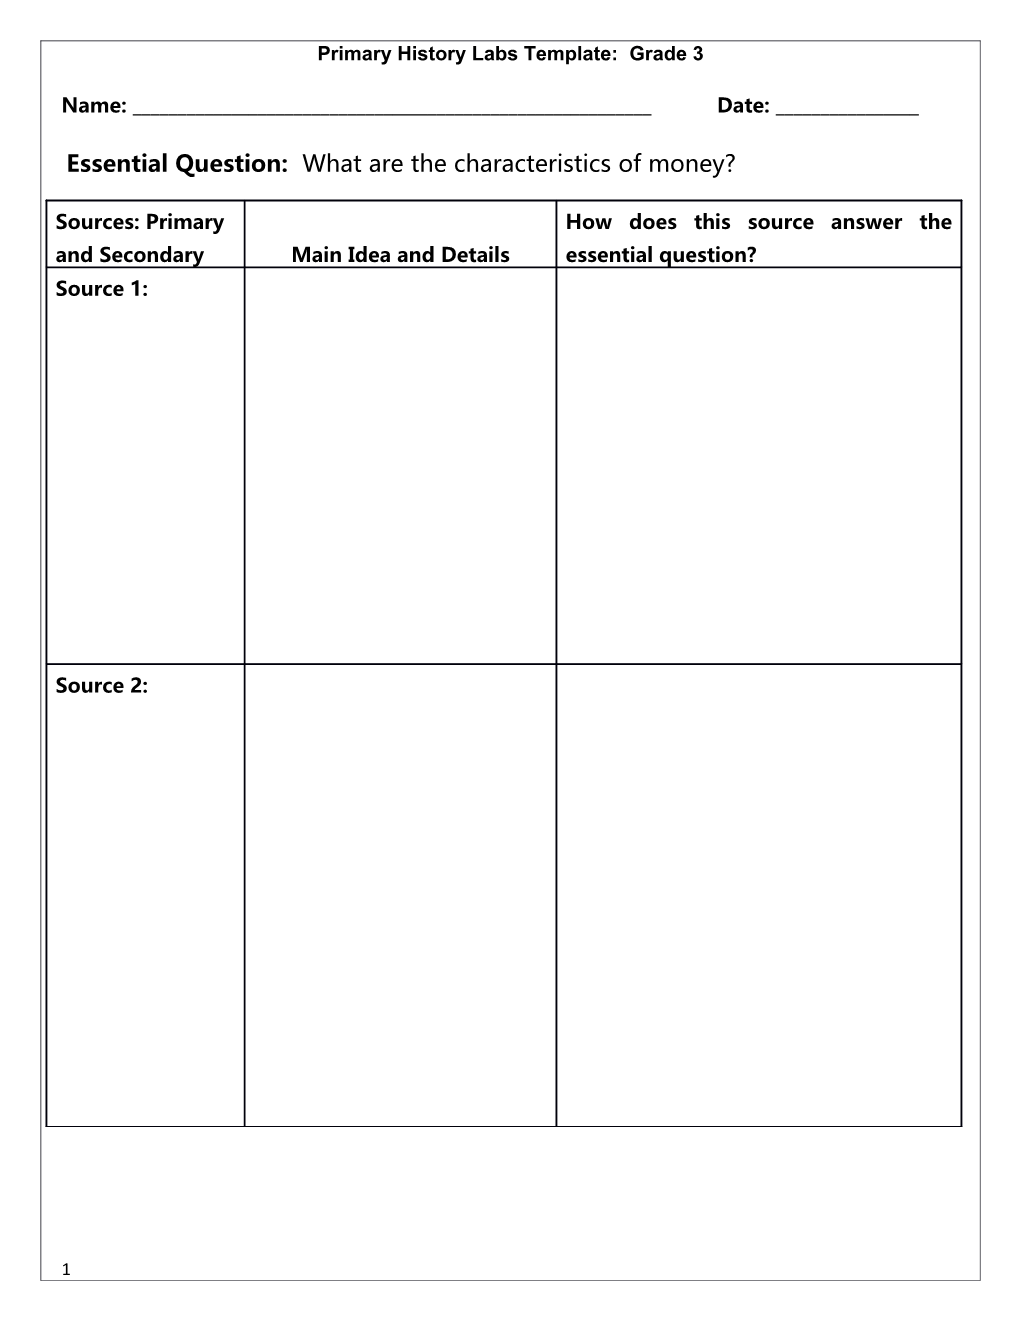 Primary History Labs Template: Grade 3